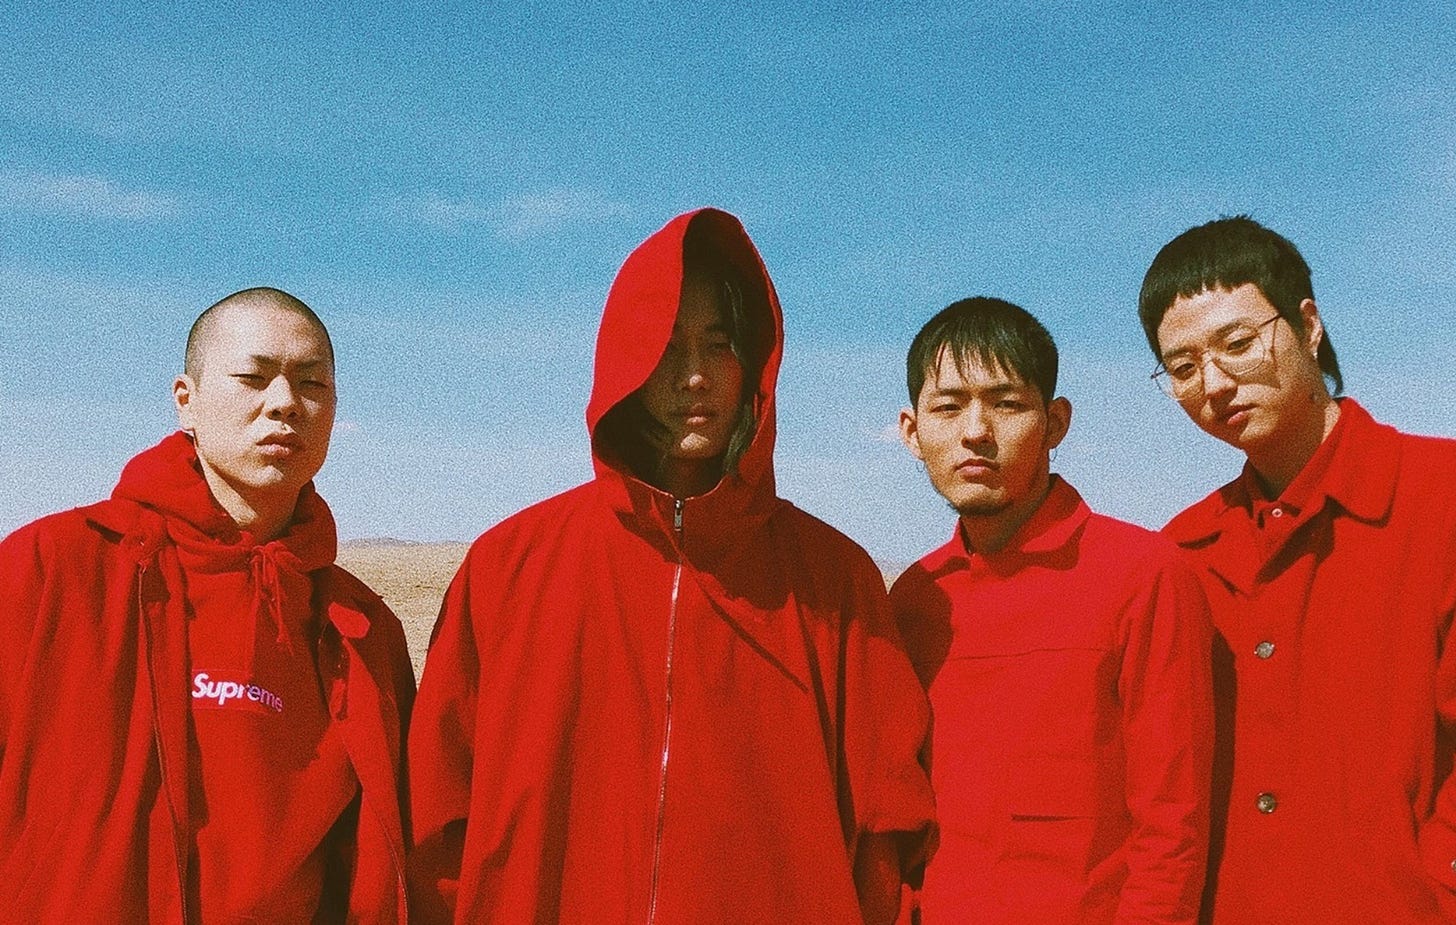 Hyukoh reveal they're working on a full-length album